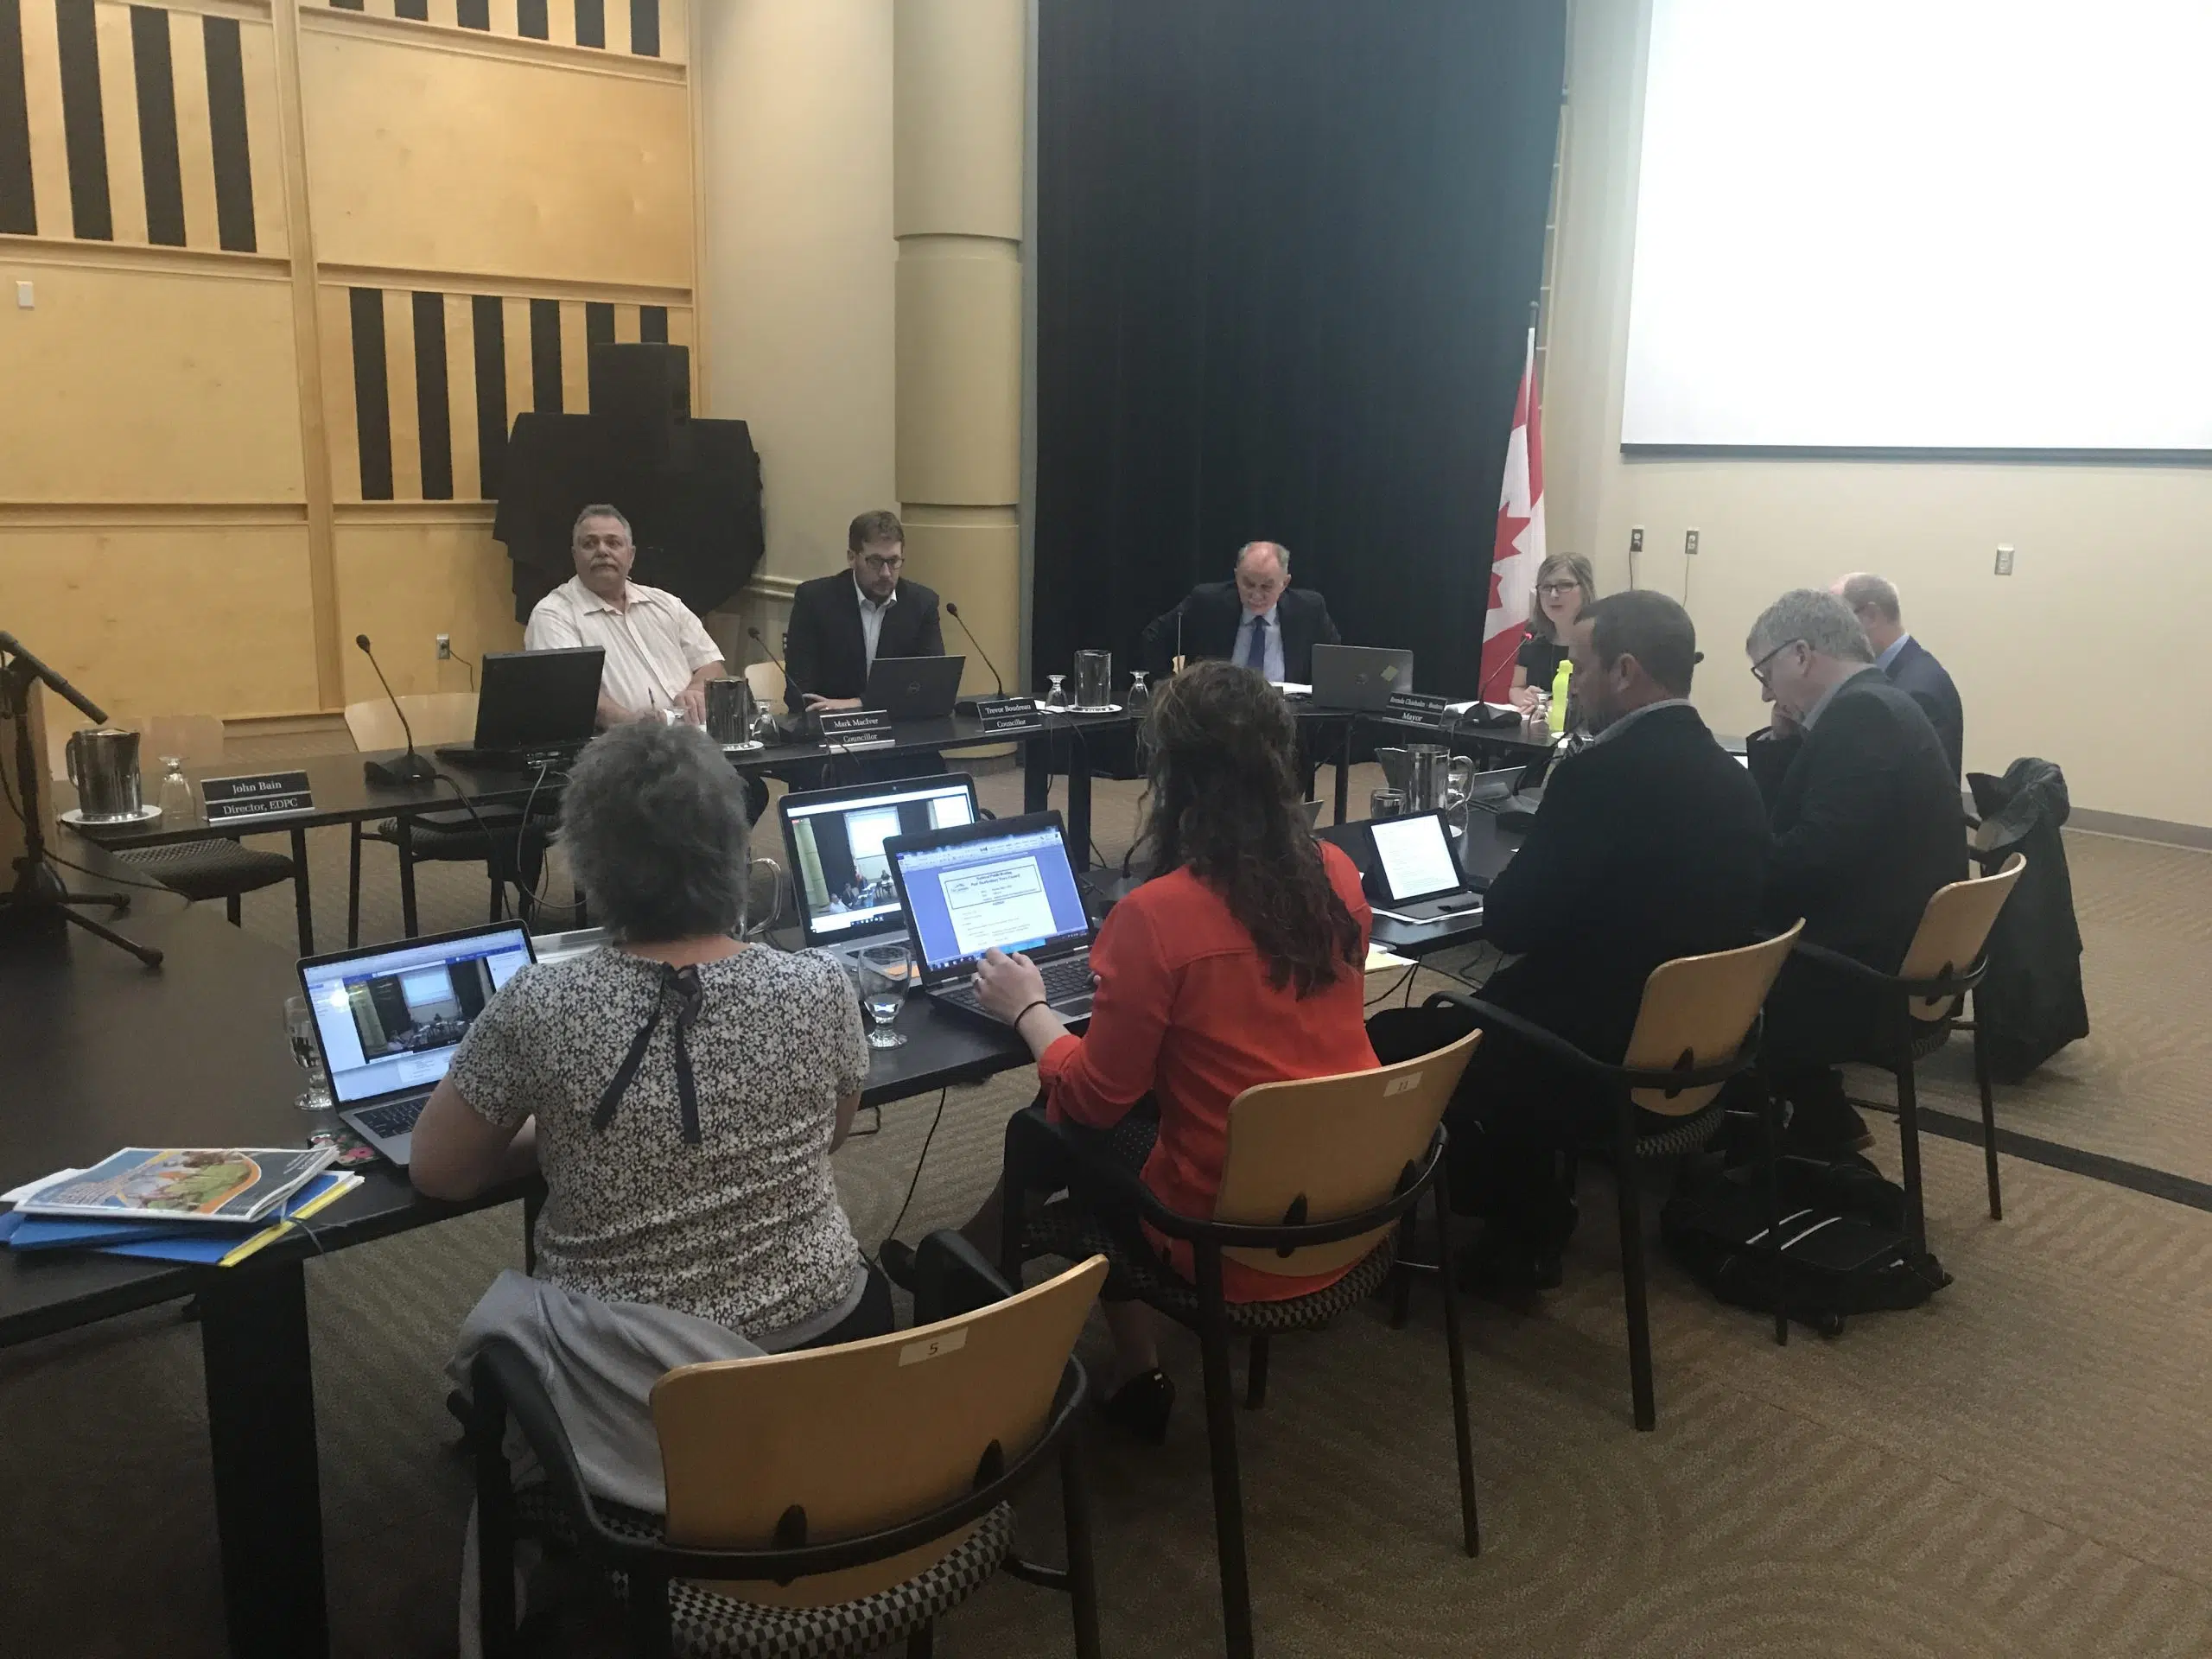 Town councillors to further debate cannabis legalization concerns